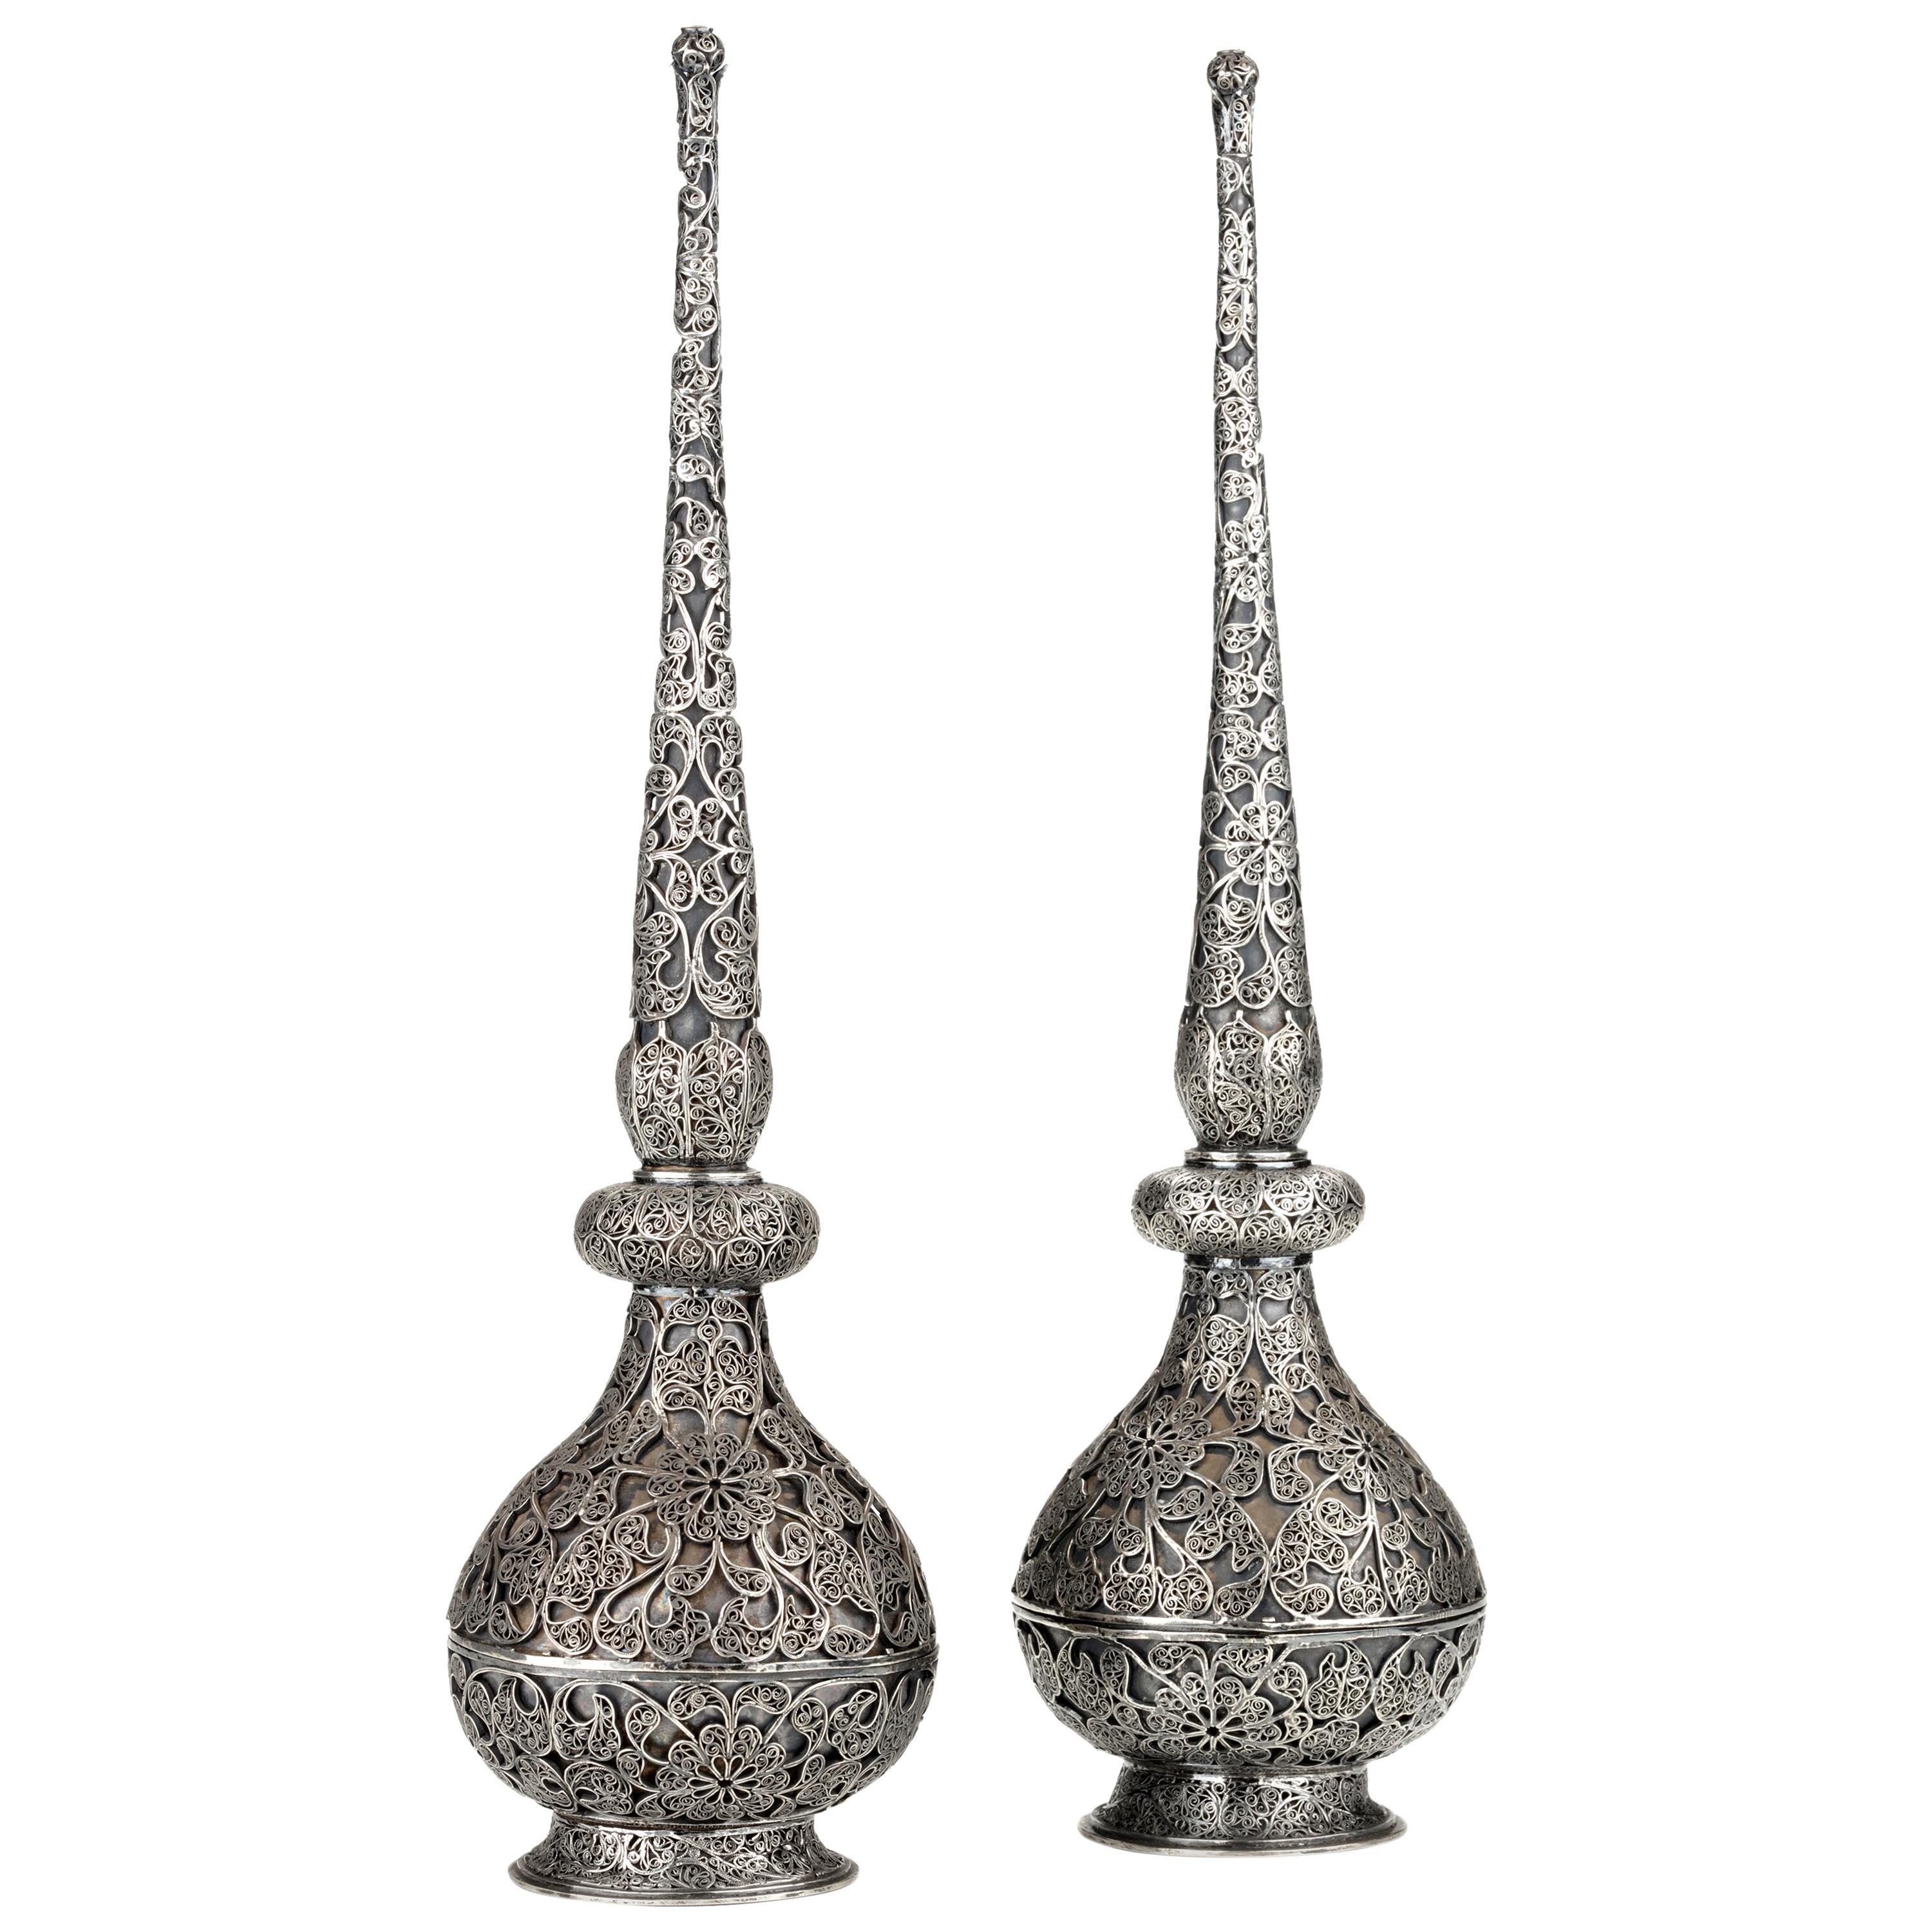 Pair of Fine Islamic Silver Filigree Rosewater Sprinklers, Early 18th Century For Sale